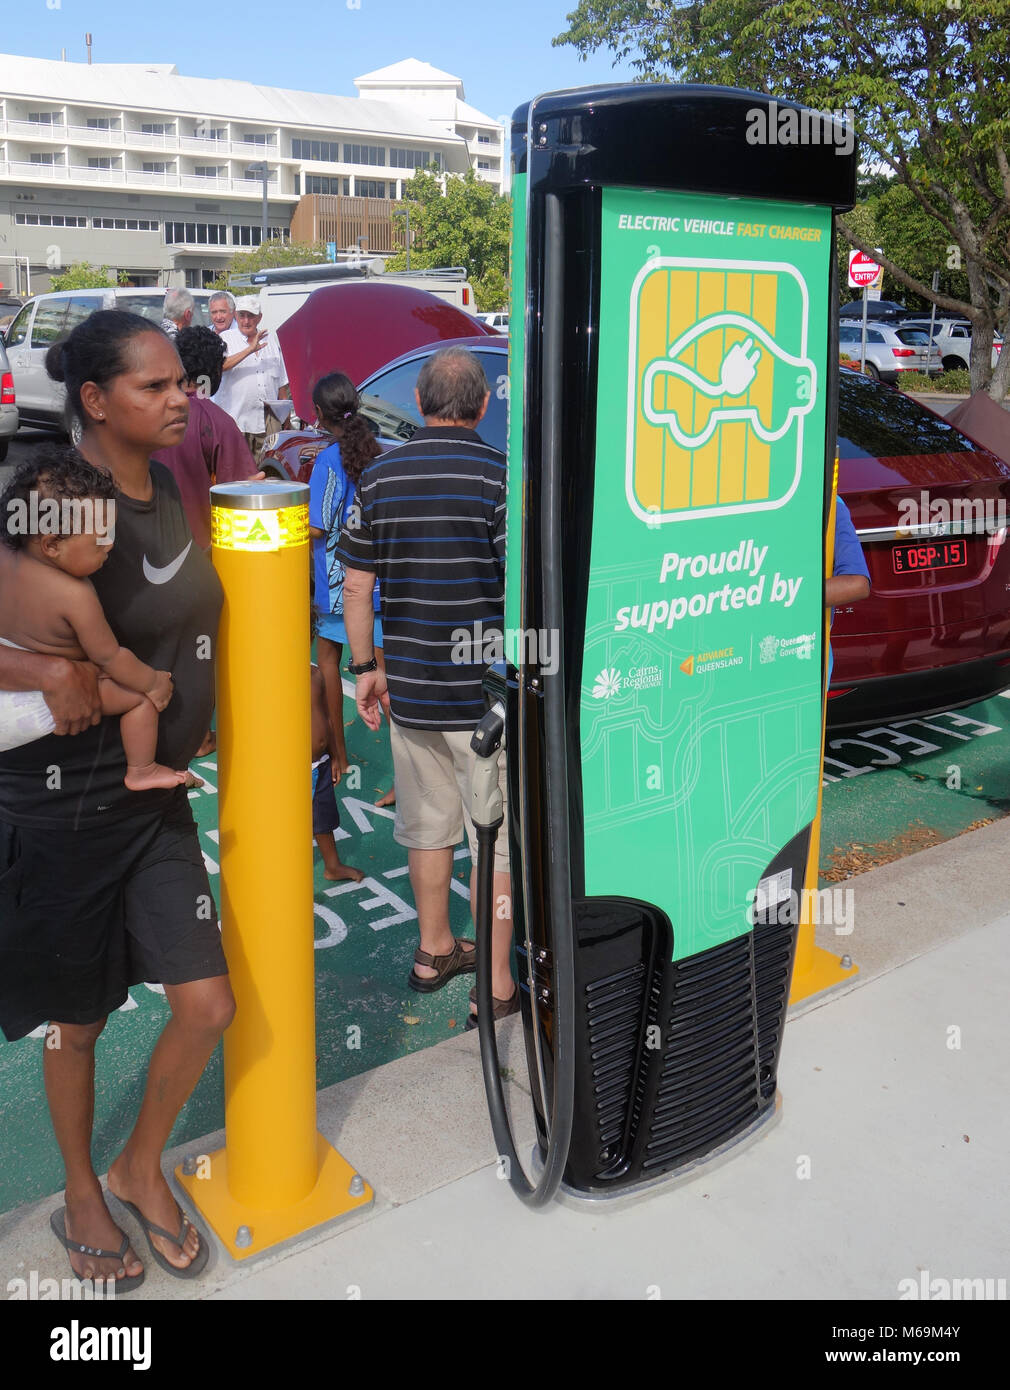 Locals checking out Tesla vehicle at new electric charging station, The Esplanade, Cairns, Queensland, Australia. No MR or PR Stock Photo